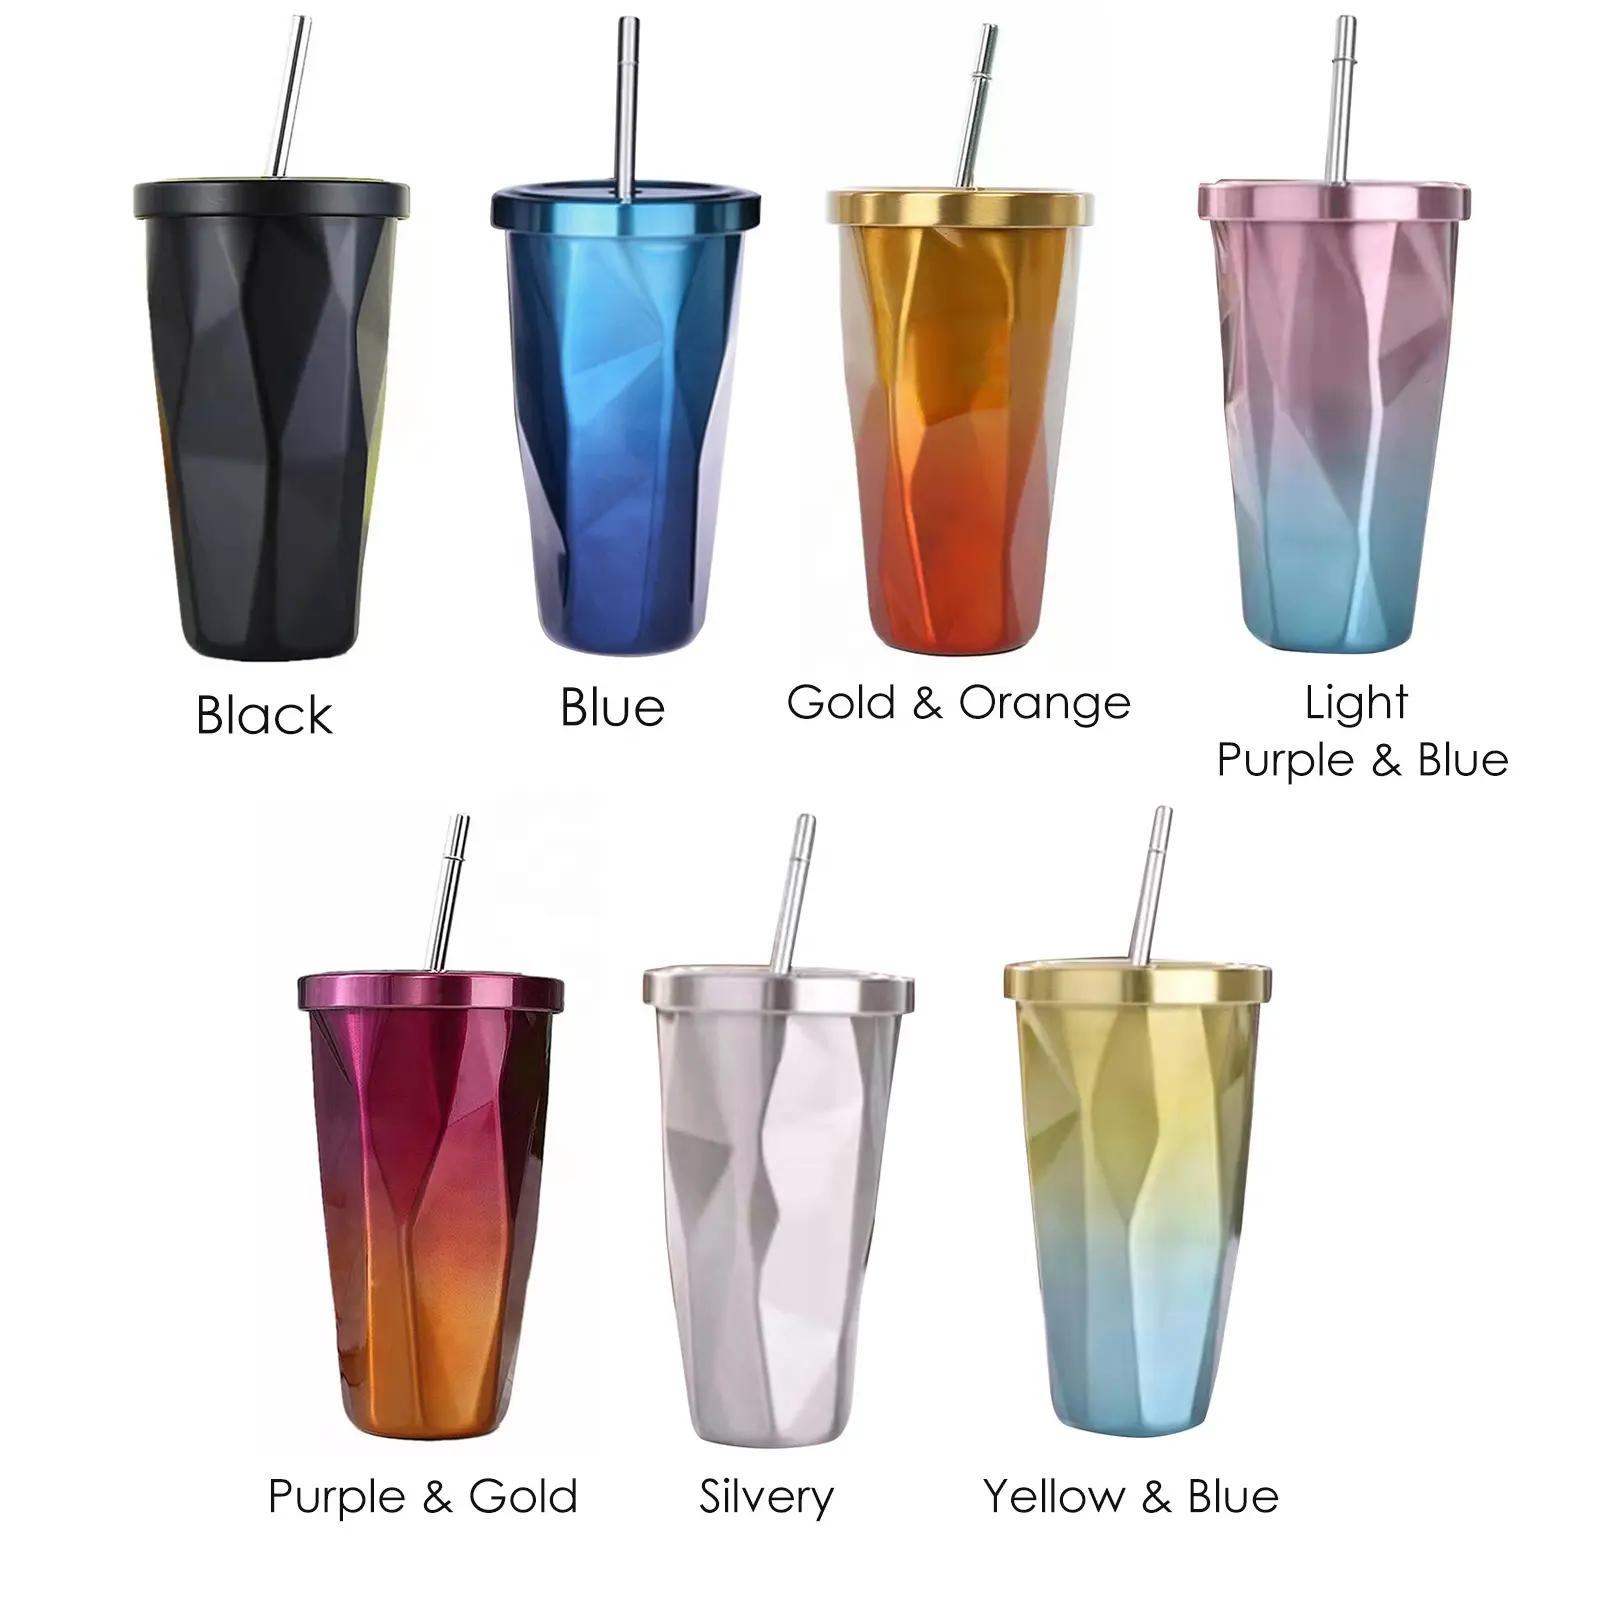 500ml Fashion Water Cup Home Travel mug Use Portable Stainless Steel Leakproof Water Bottle with Lid Straw for coffee